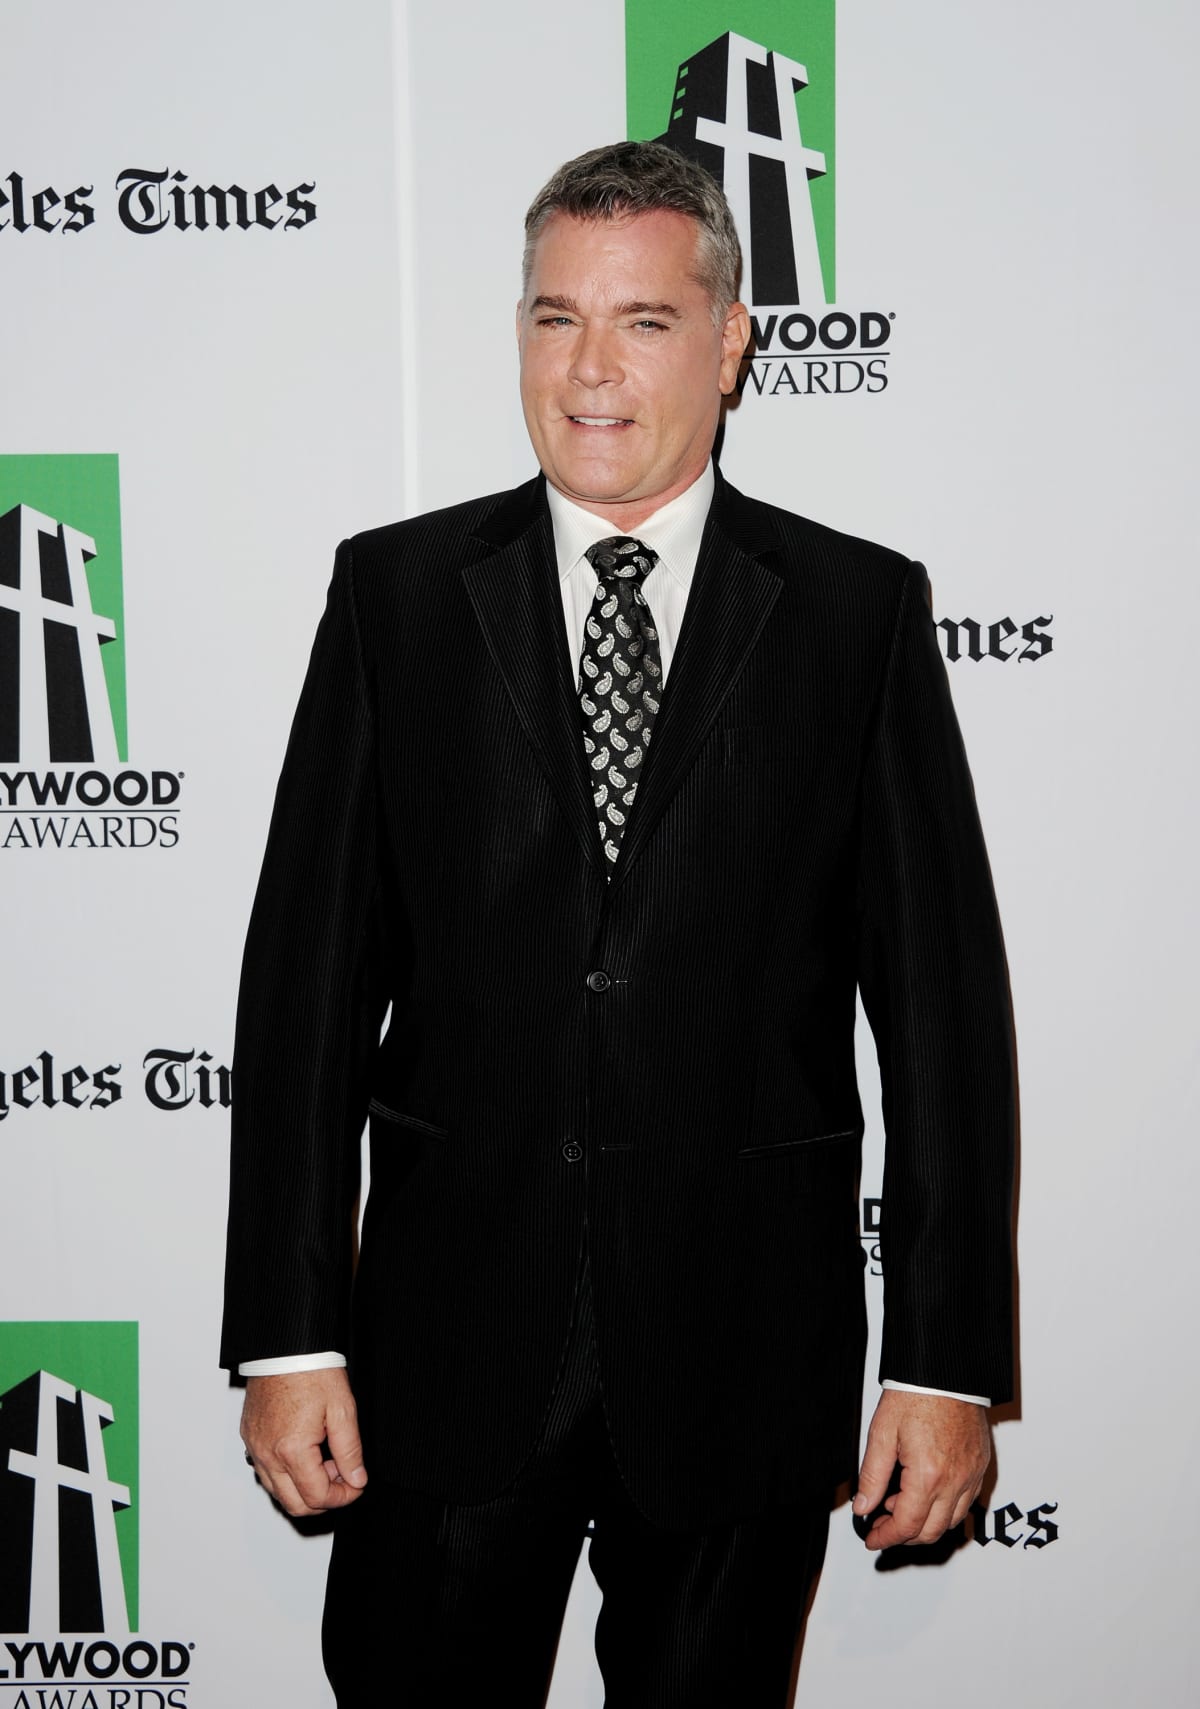 DEAUVILLE, FRANCE - SEPTEMBER 09:  Ray Liotta poses for the photographers after he unveiled his cabin sign as a tribute for his career along the Promenade des Planches during the 40th Deauville American Film Festival on September 9, 2014 in Deauville, France.  (Photo by Francois G. Durand/WireImage)